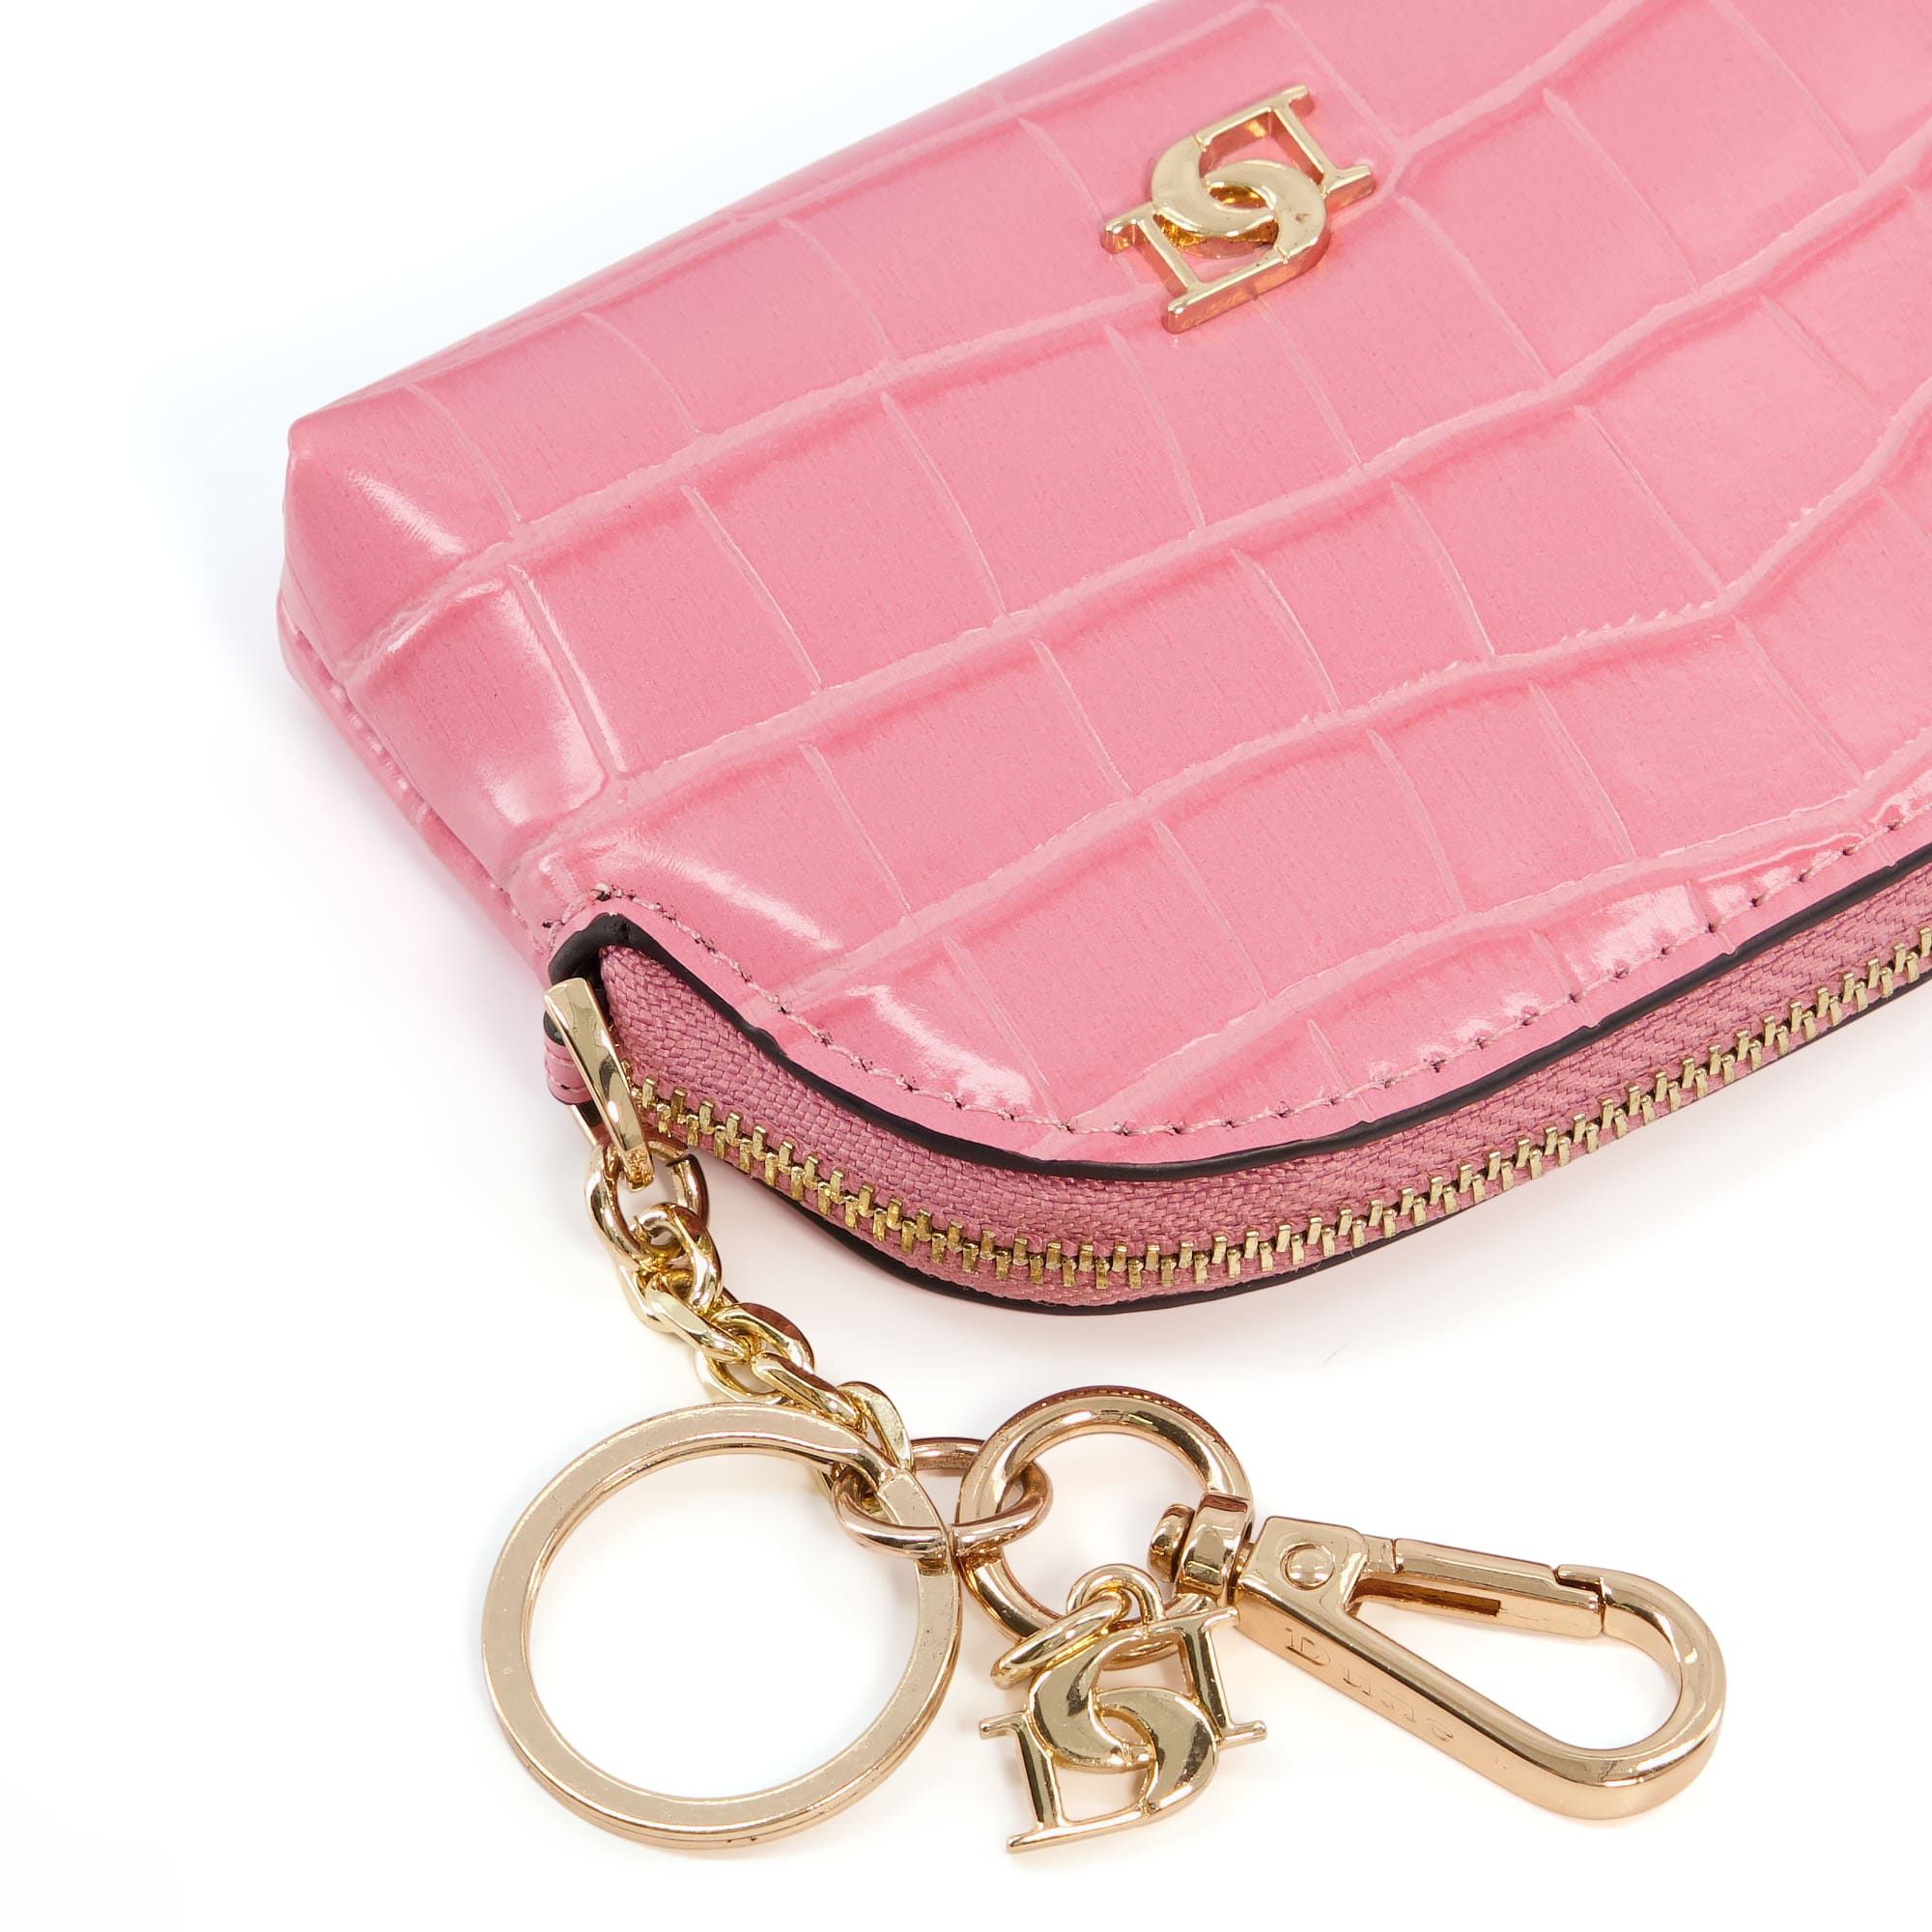 We believe small accessories are the building blocks of every outfit. Petite yet practical, this croc-effect purse features a lobster claw to attach to your keys or handbag.